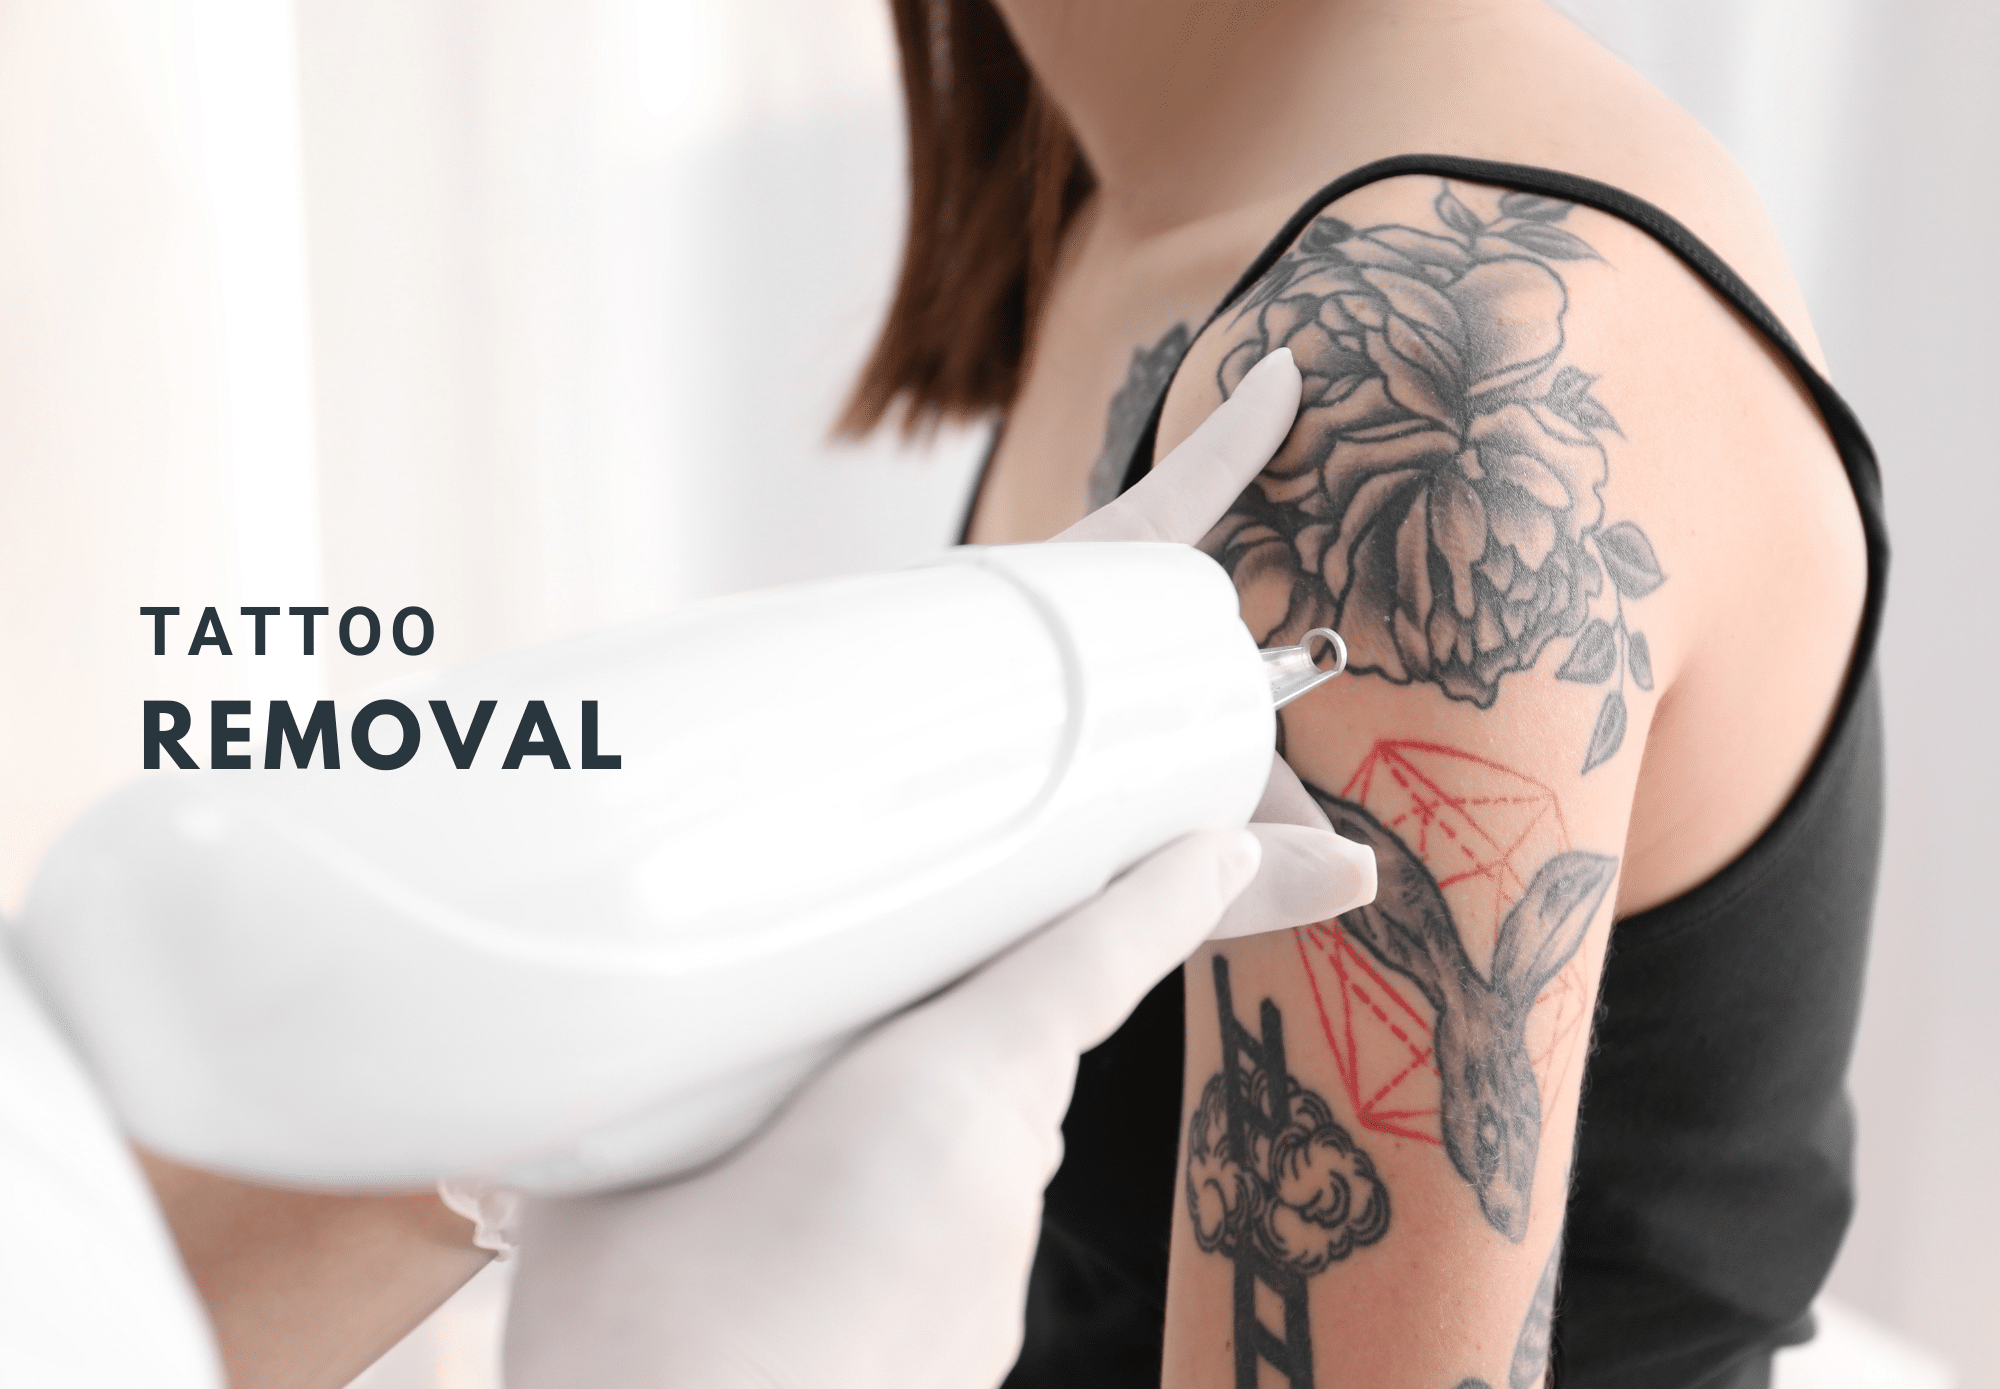 Woman undergoing a tattoo removal treatment.